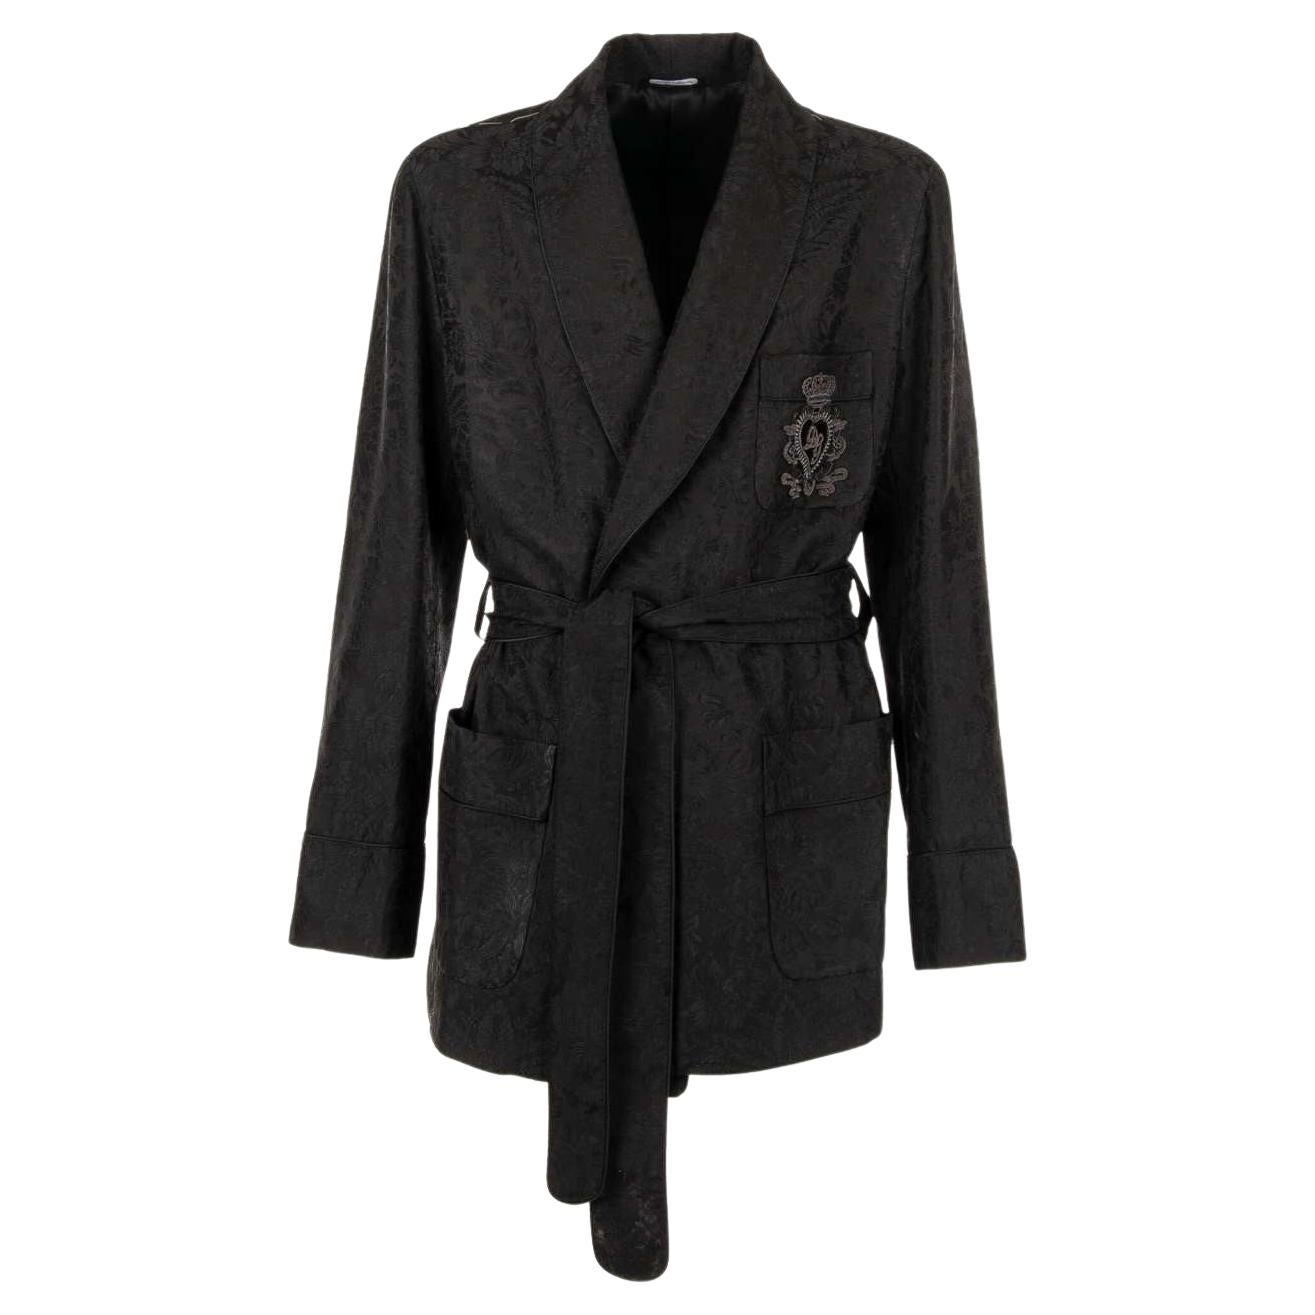 D&G Floral Jacquard Robe Blazer with DG Heart Crown Embroidery Black 46 For Sale